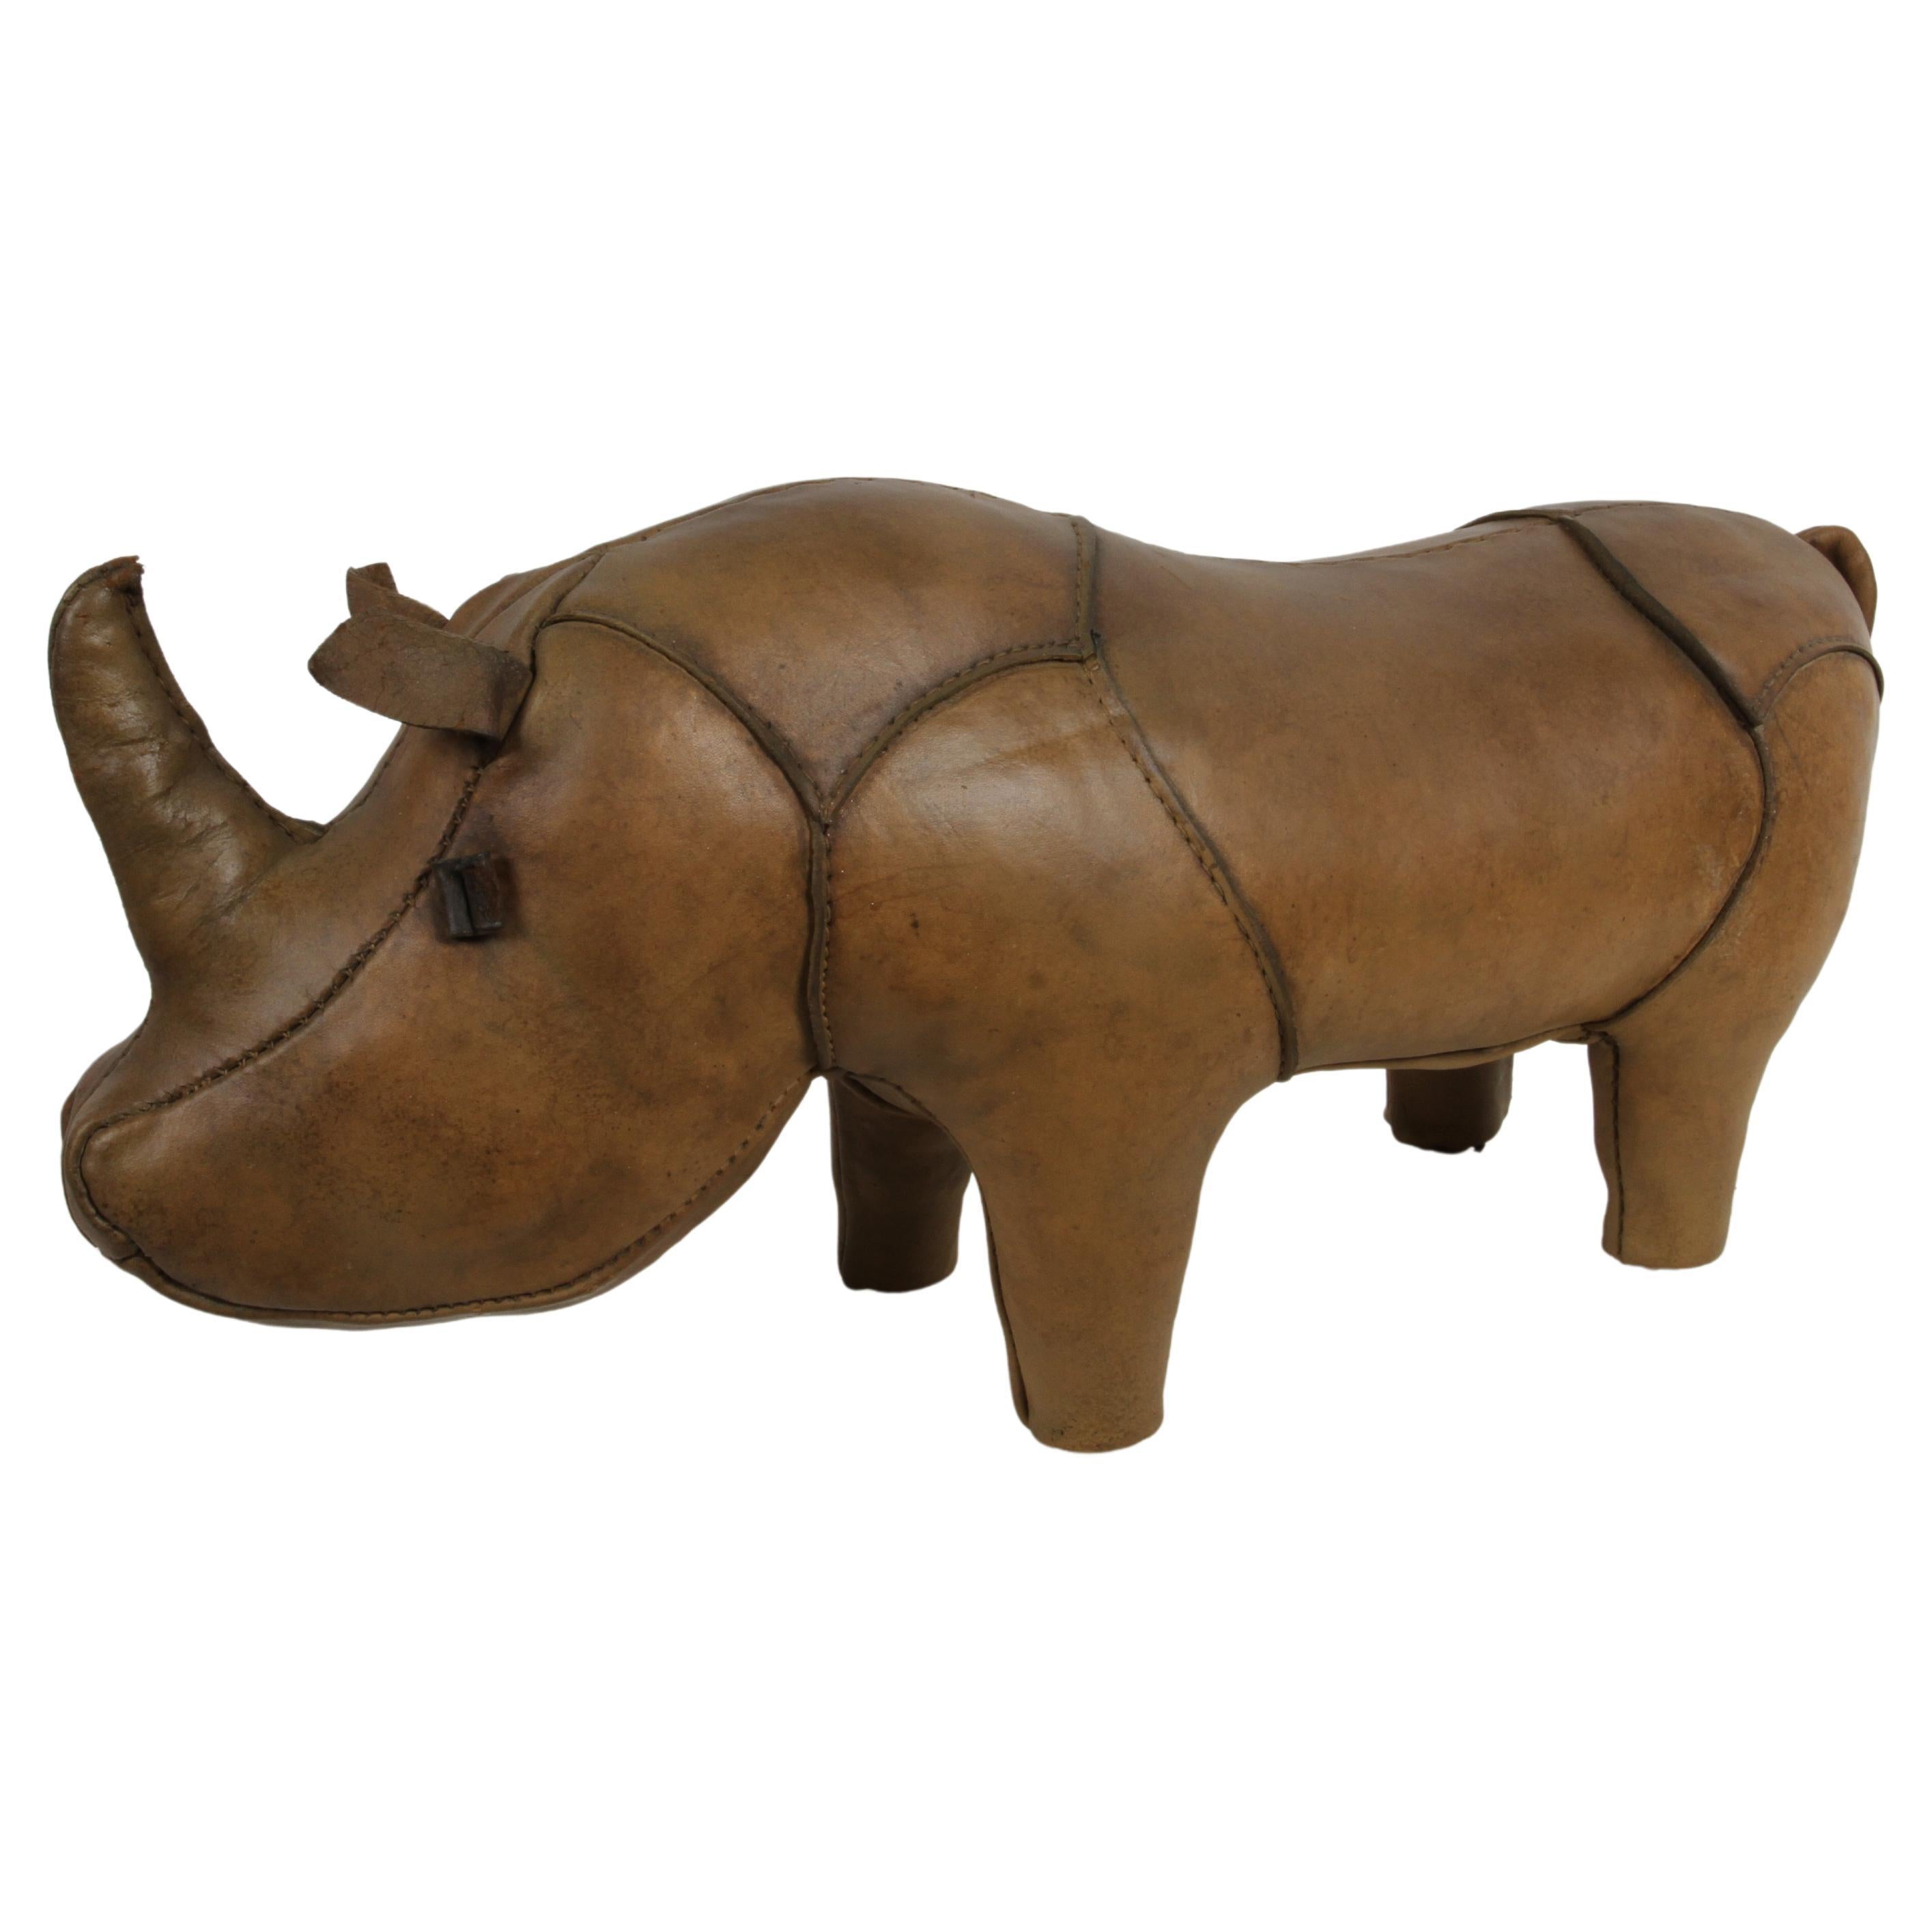 1960s Dimitri Omersa Leather Rhino Retailed by Abercrombie & Fitch - Restored For Sale